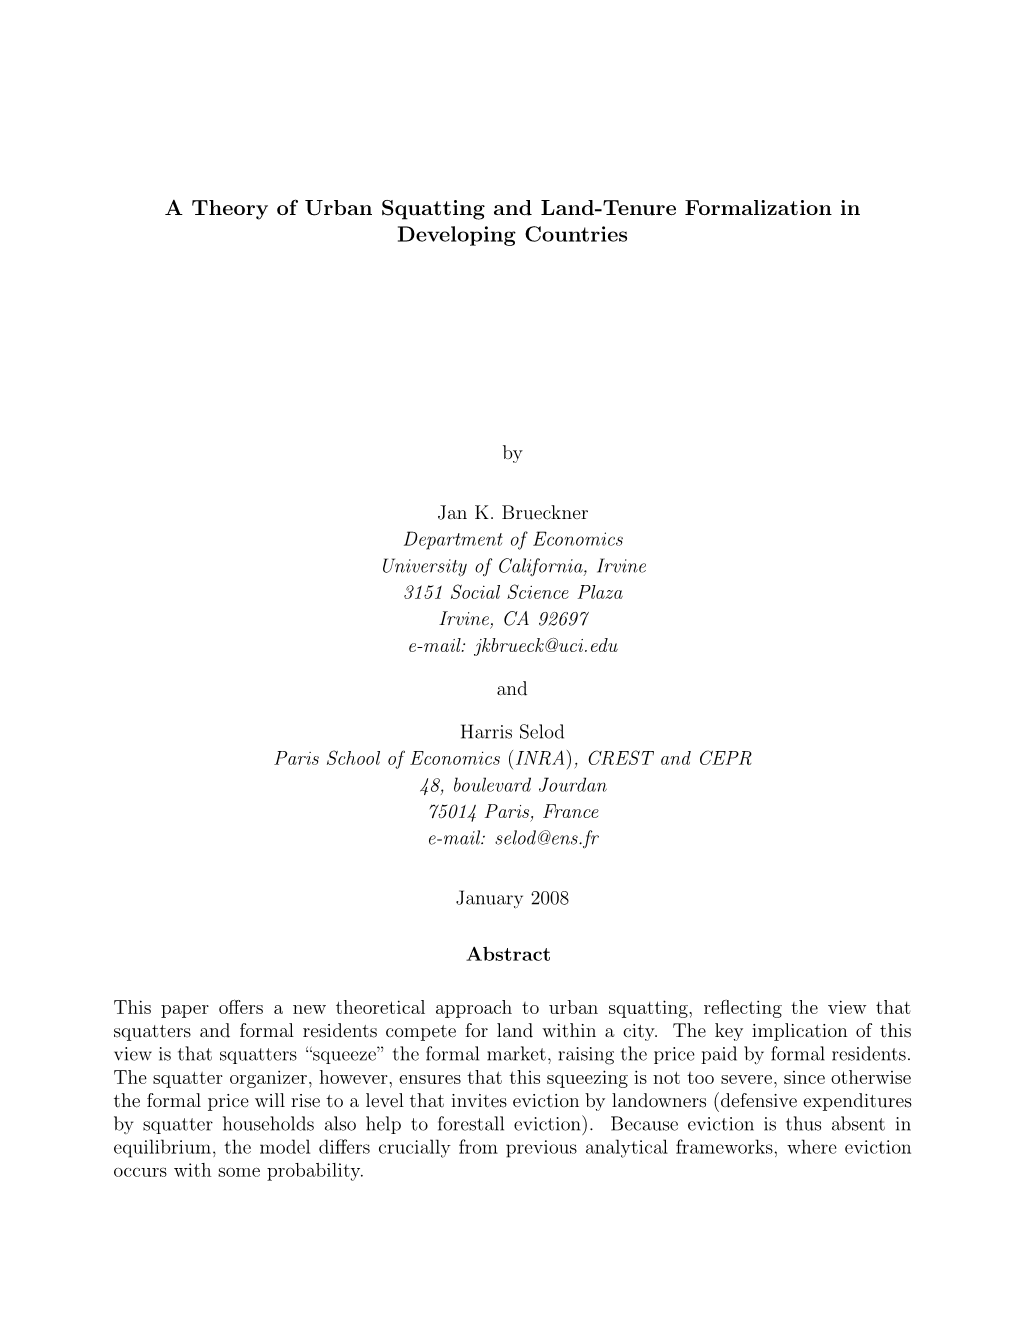 A Theory of Urban Squatting and Land-Tenure Formalization in Developing Countries